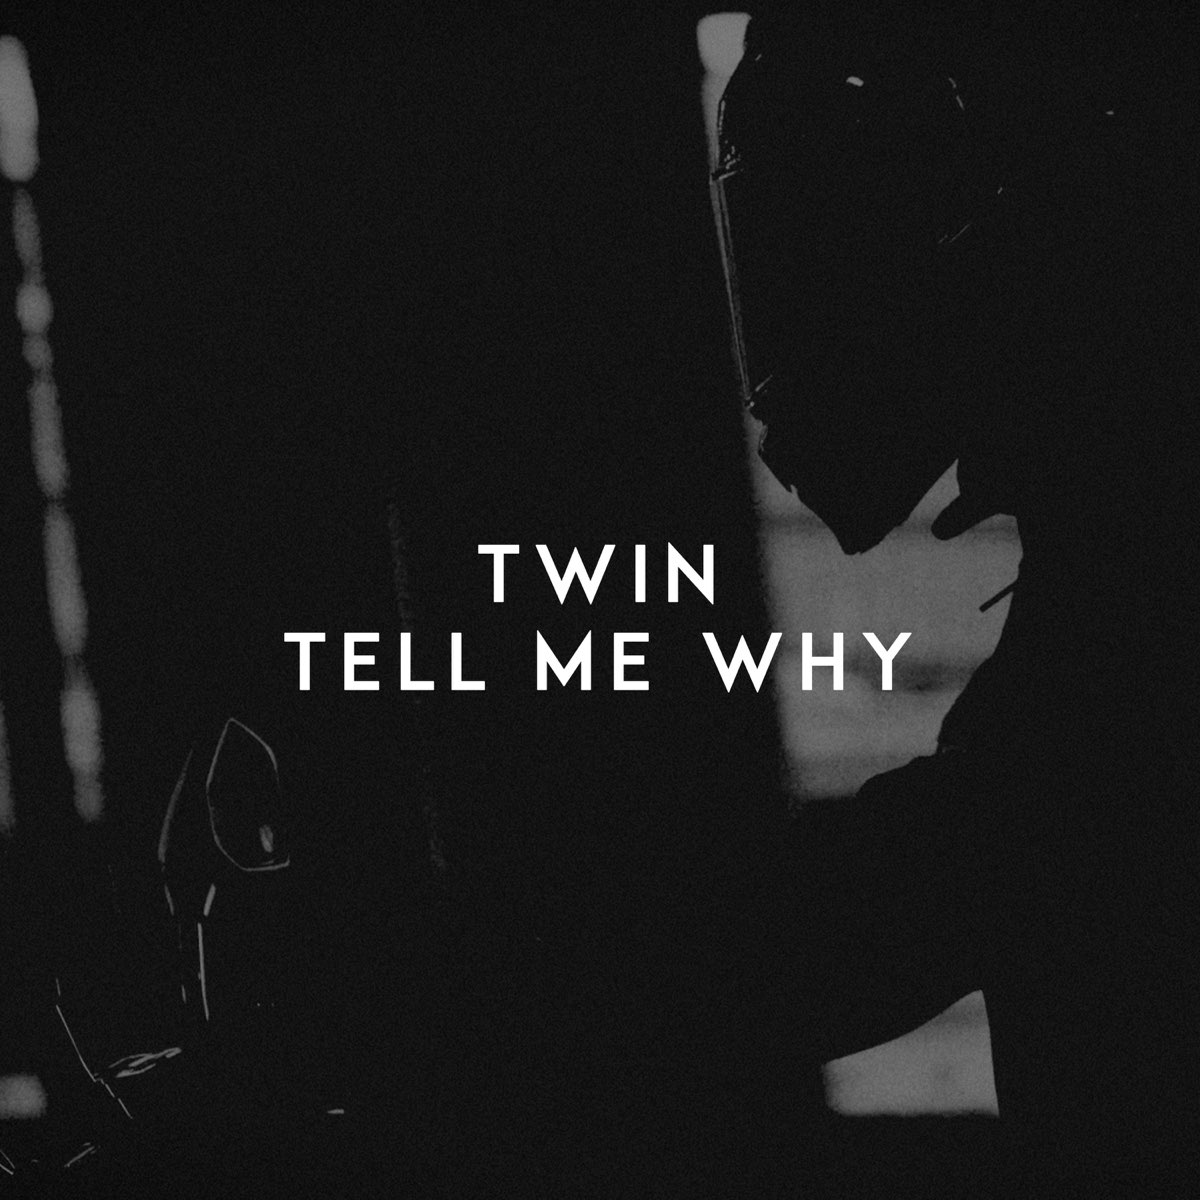 Tell me why to do. Tell me why?. Tell me why обложка. Альбом tell me why...... Twin - tell me why.